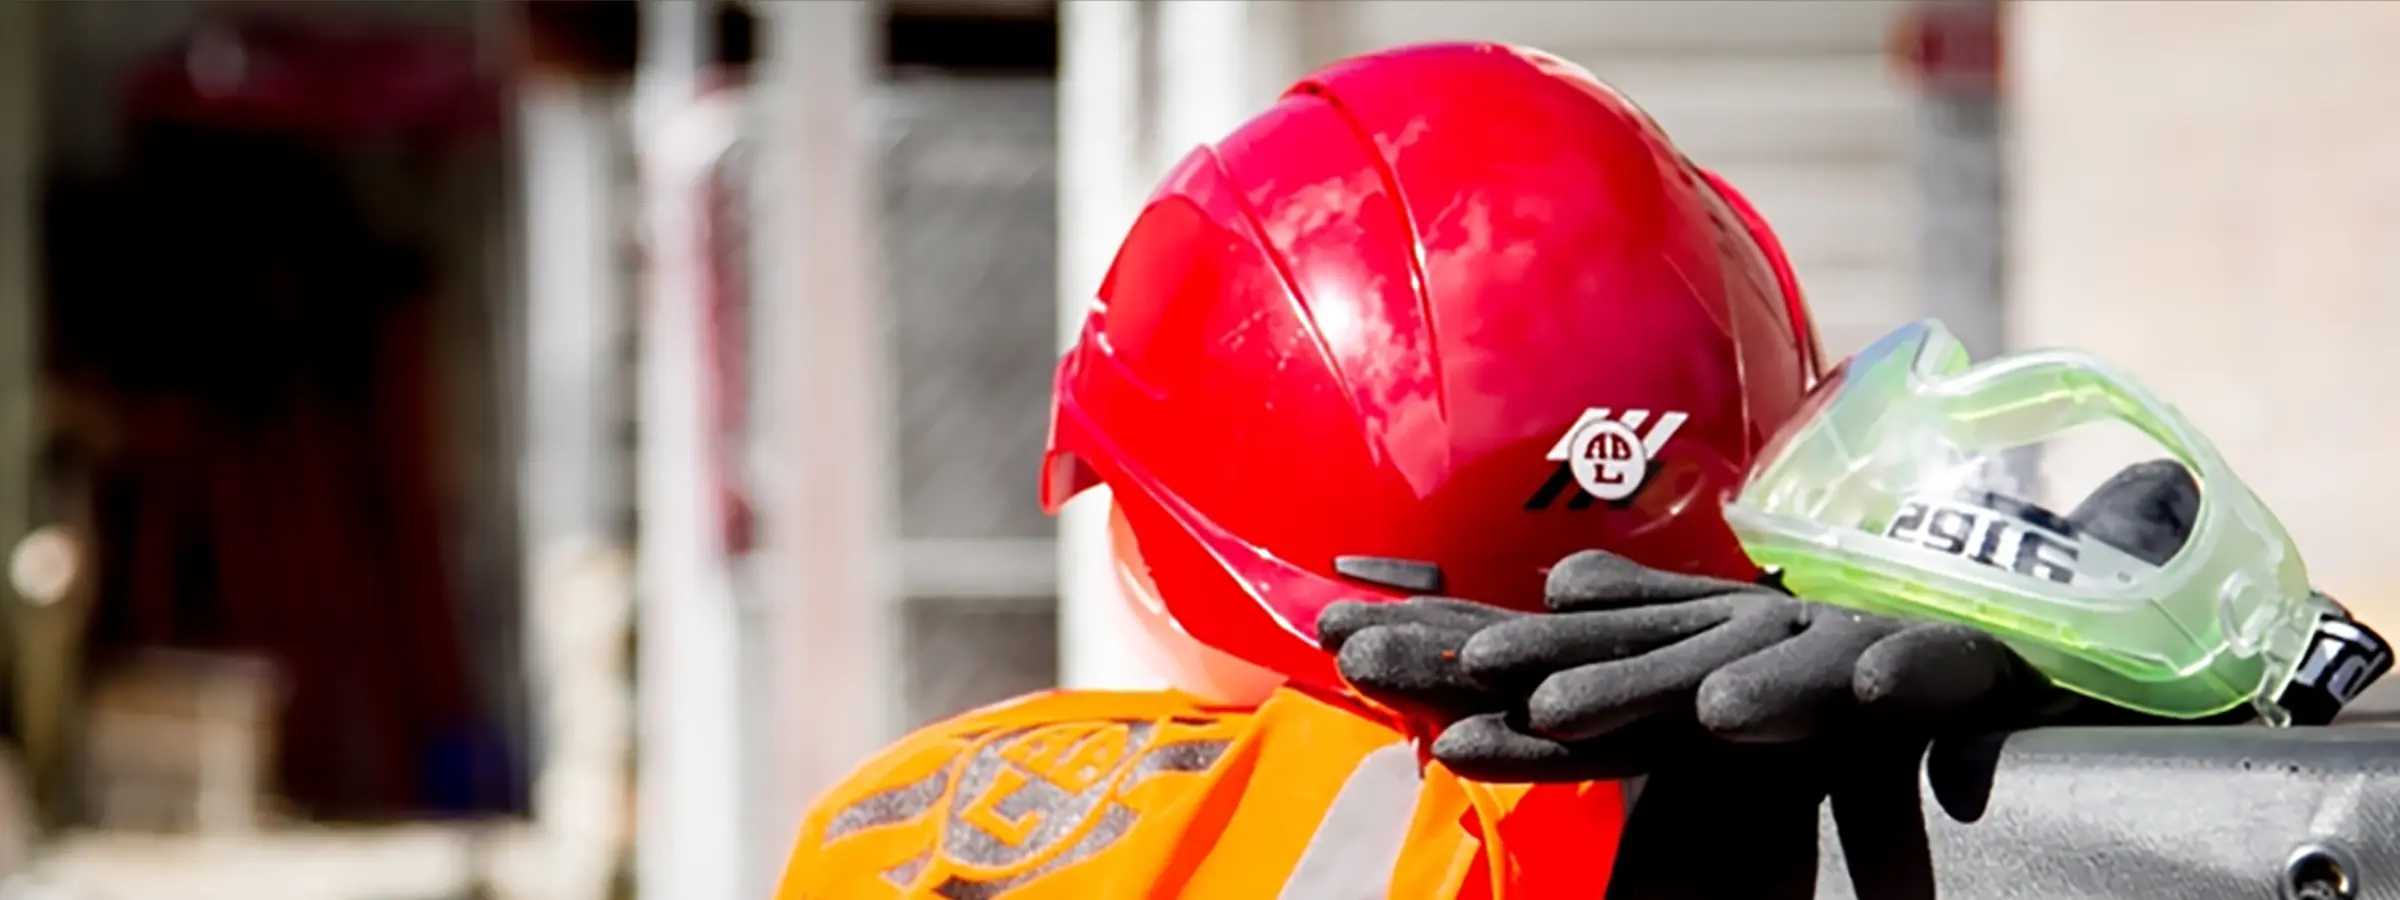 ABL Safety Helmet and Gear